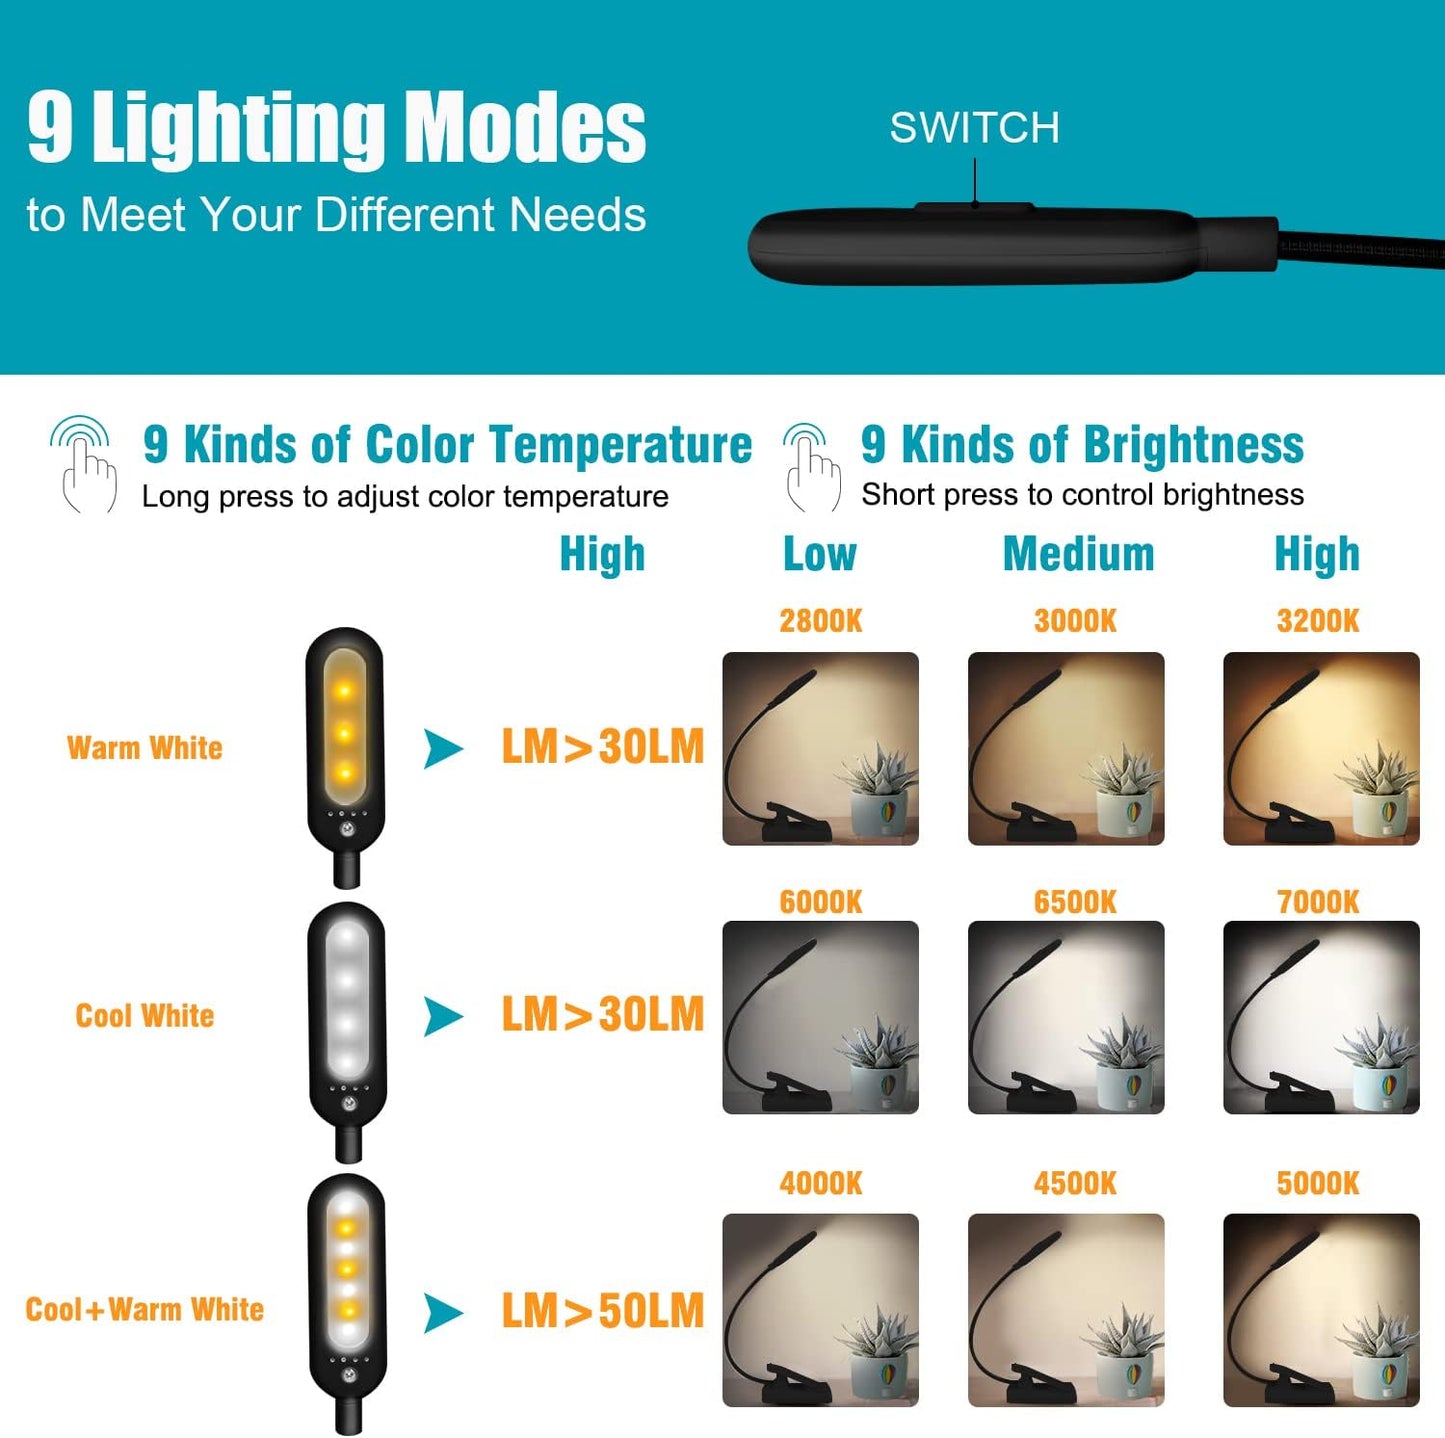 LED clip light shown with 3 different color temperatures and and 3 different levels of brightness | AskSAMIE